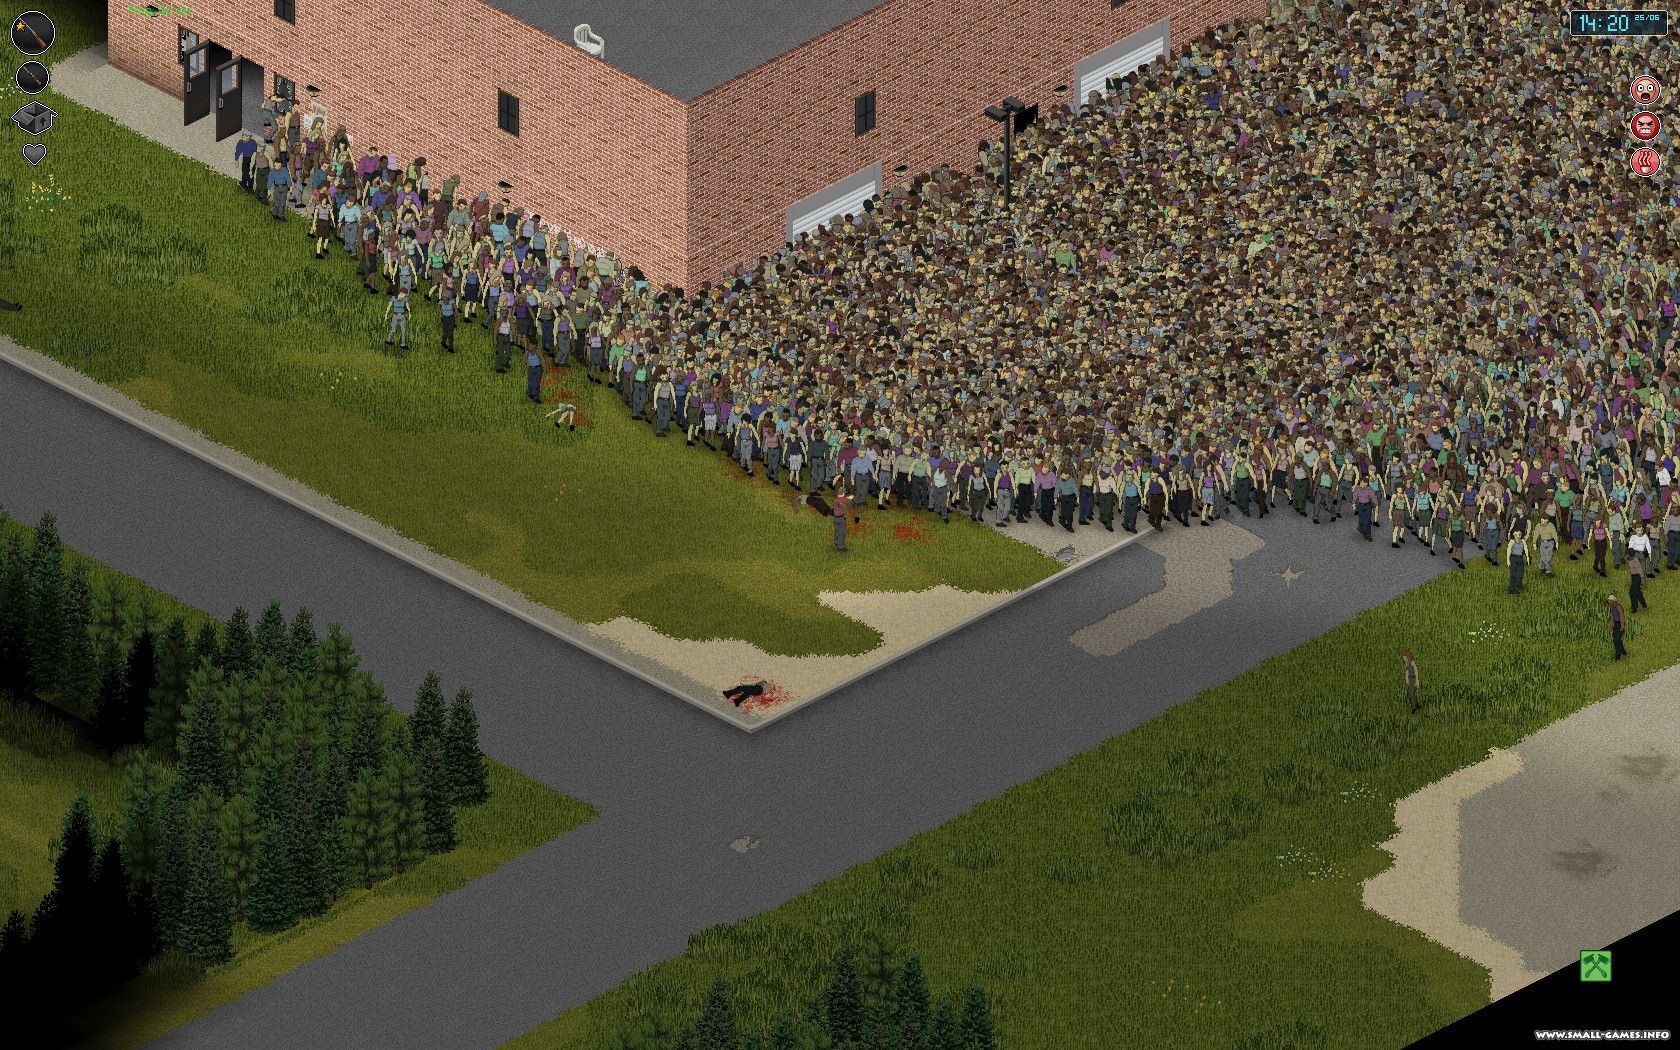 project zomboid delete mods you downloaded from steam workshop